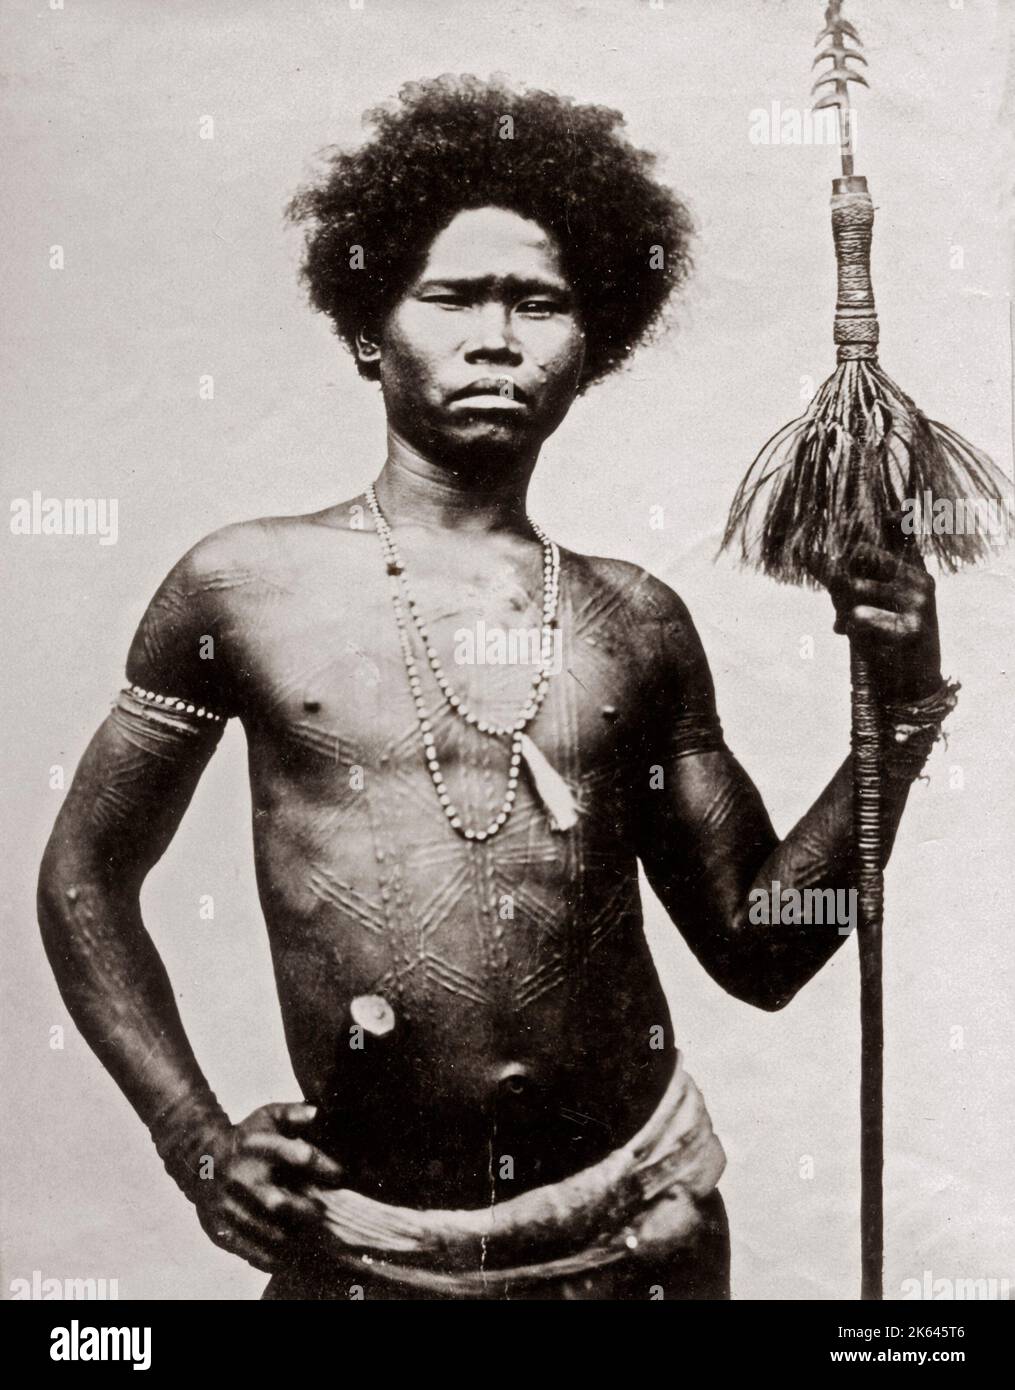 c.1880s South East Asia - probably the Philippines - man with decorative or ritual scarring and a spear Stock Photo